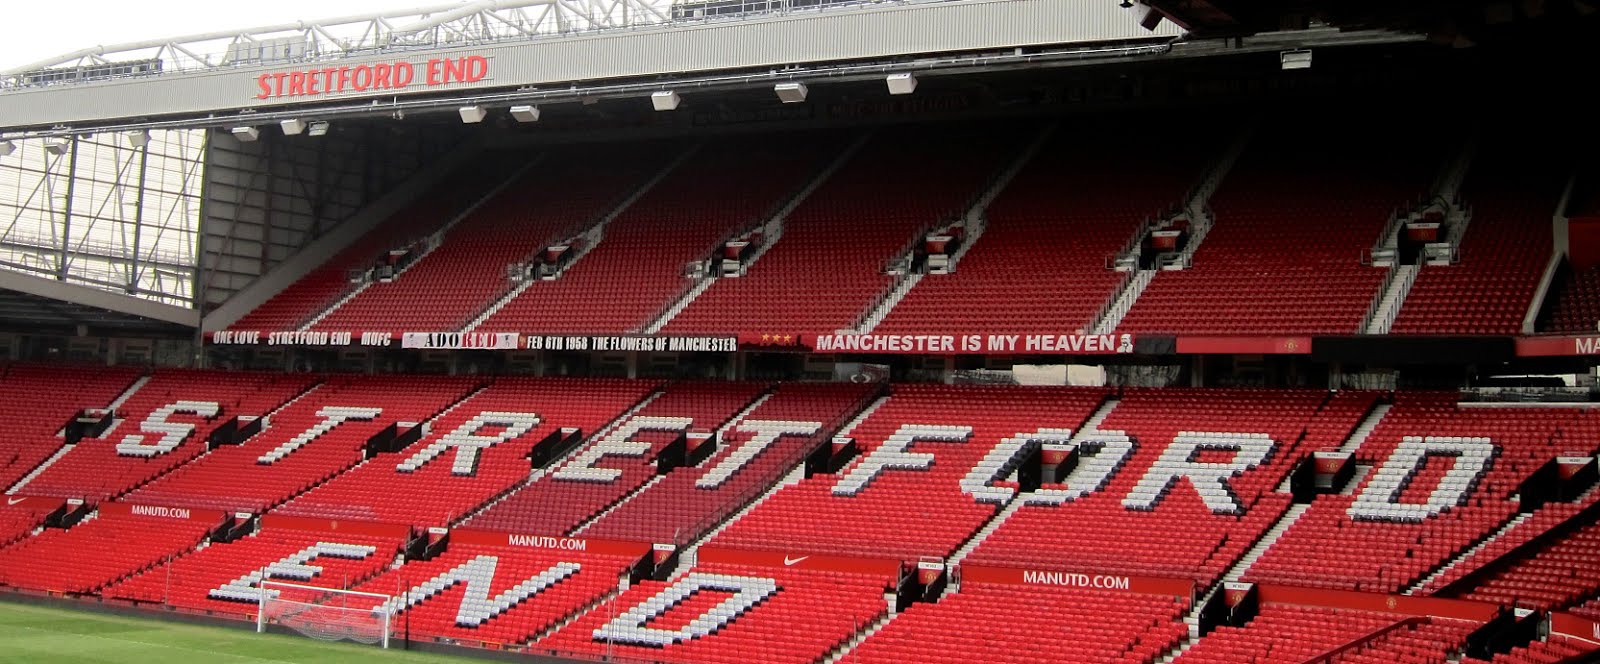 Stretford End - News and everything Manchester United